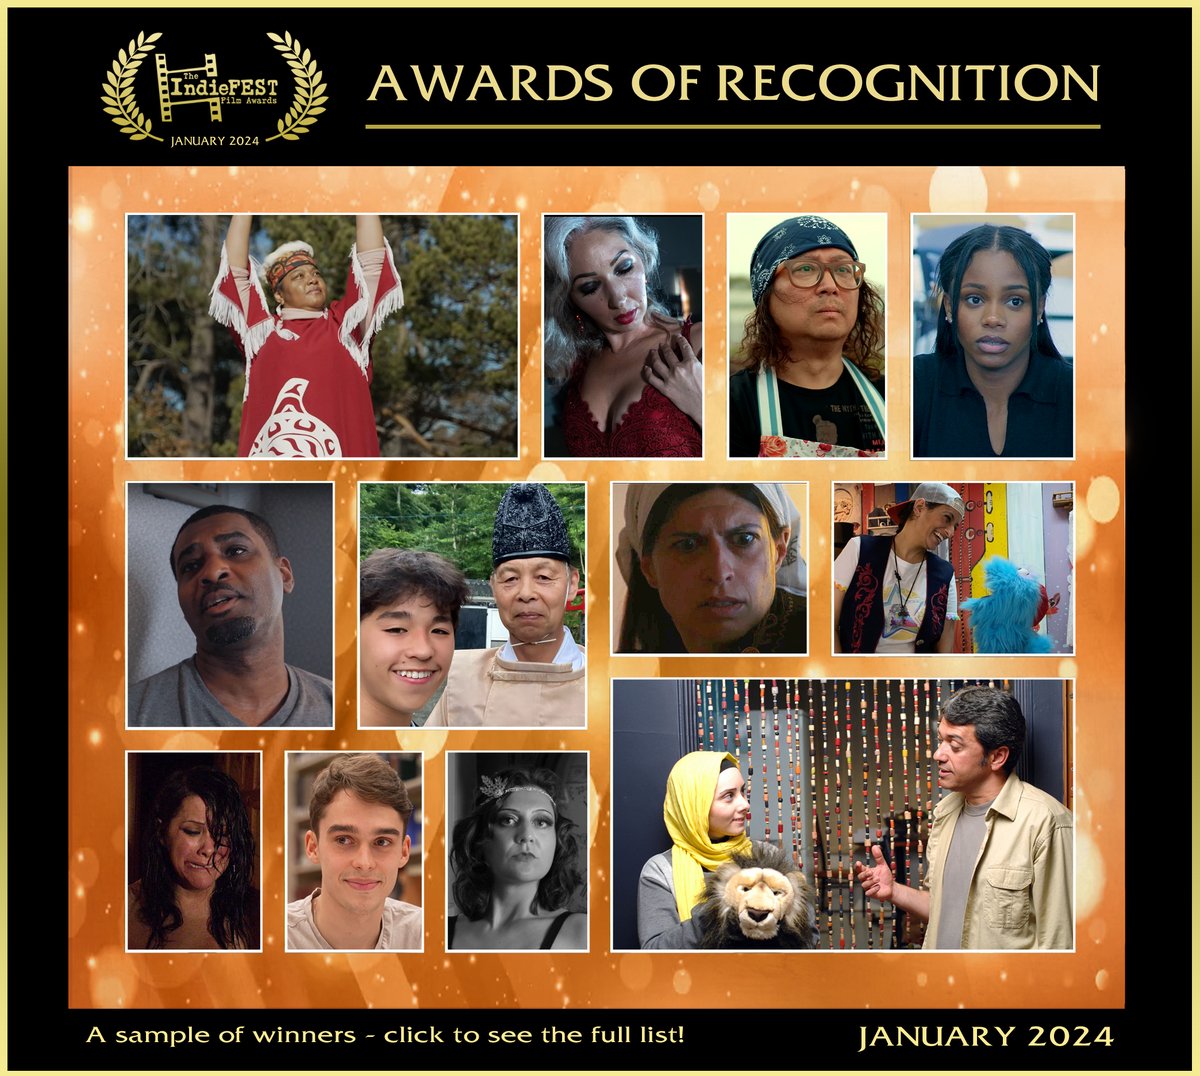 Congratulations to the AWARD OF RECOGNITION winners! Hailing from all corners of the globe this group delivered films that showcased their work across all forms and genres. From comedies to docs this group brought it all. See all the winners here: theindiefest.com/award-of-recog…